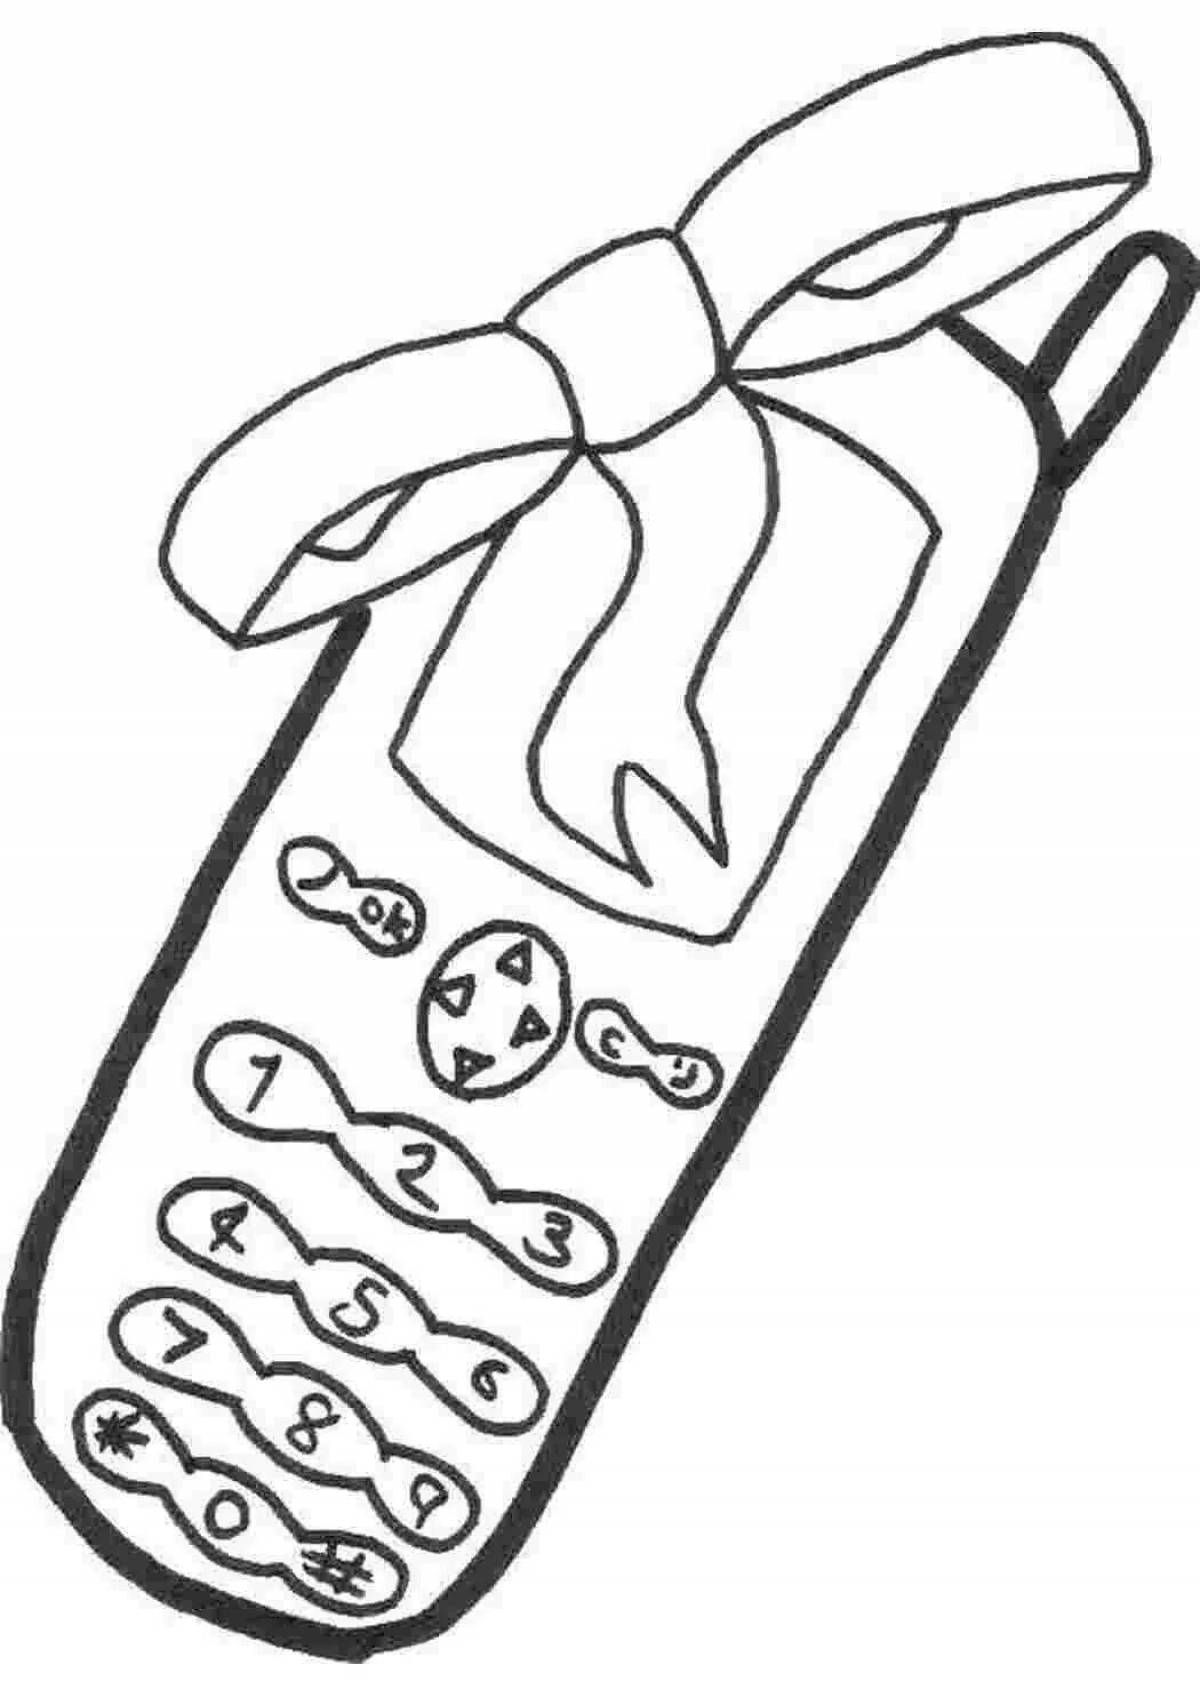 Coloring page for a kid on the phone